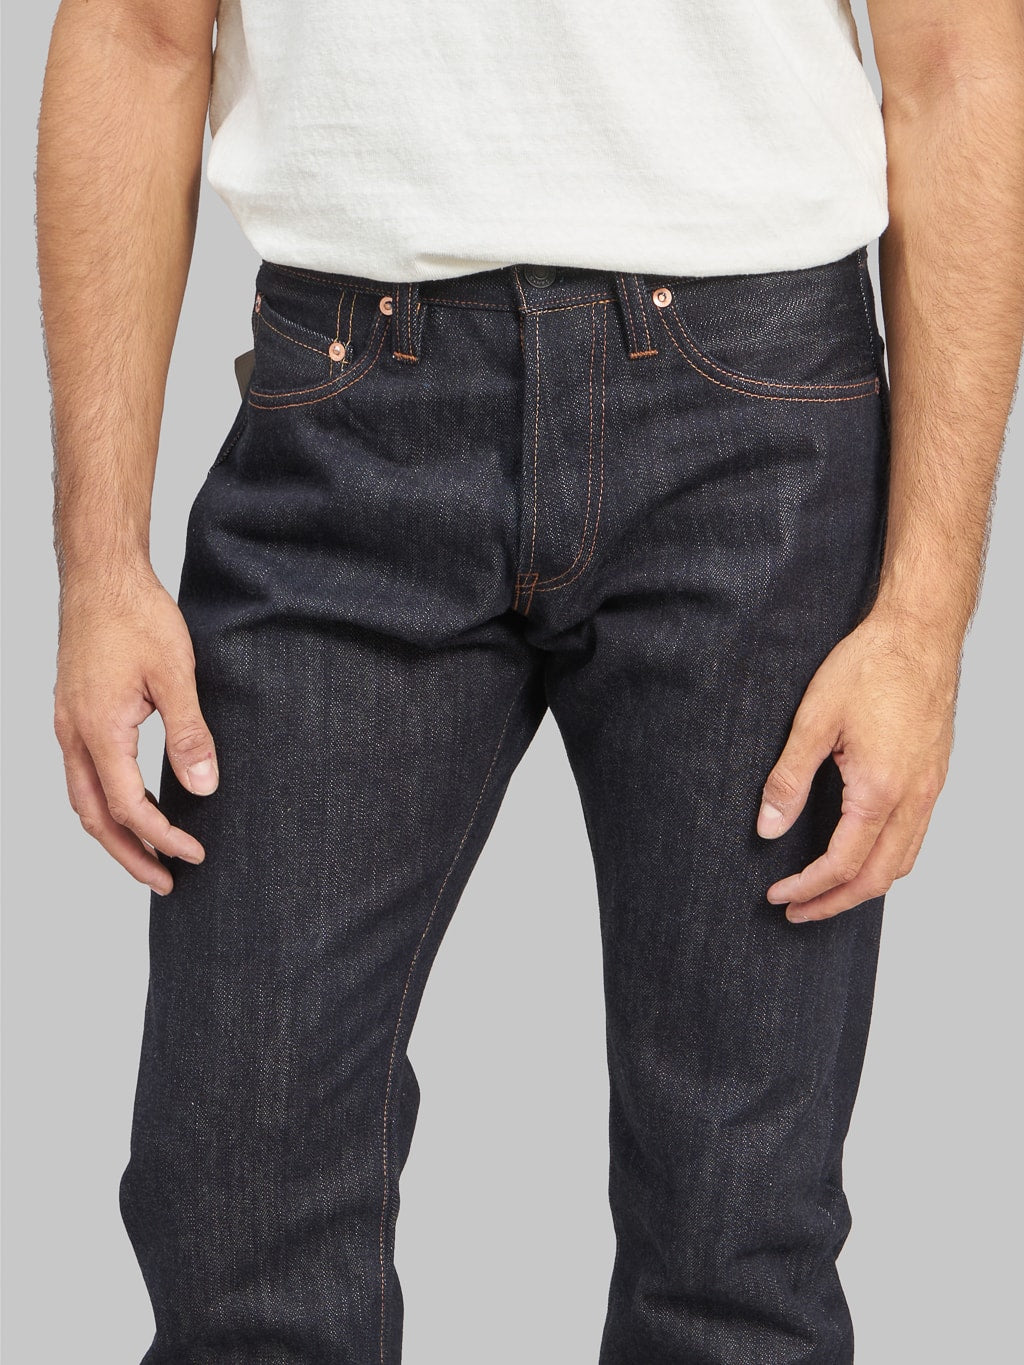 Studio dartisan suvin gold relaxed tapered jeans front rise